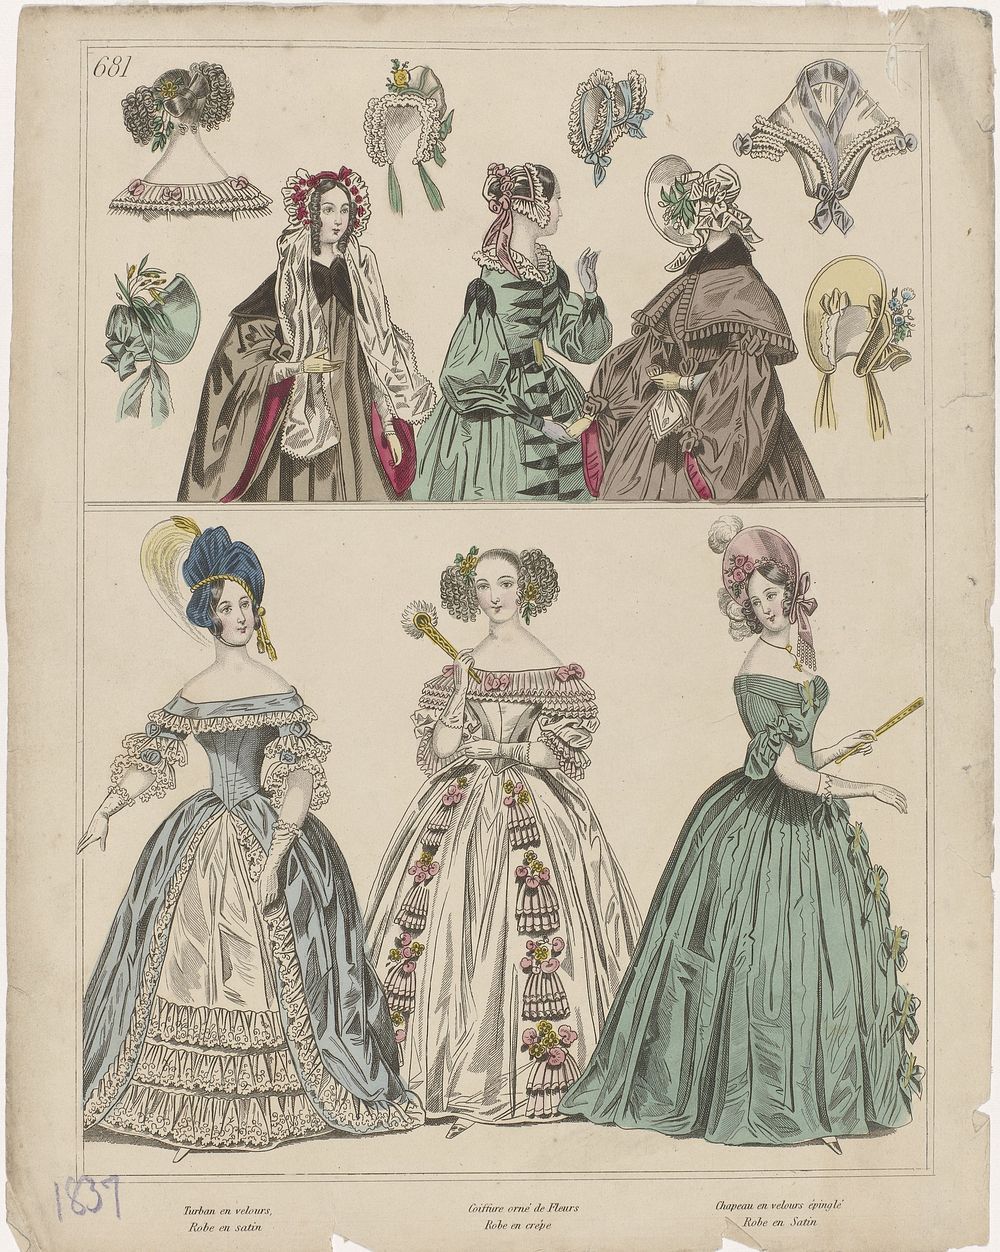 Townsend's Monthly Selection of Parisian Costumes, 1837, No. 681 : Turban en velours (...) (1837) by anonymous and Henry…